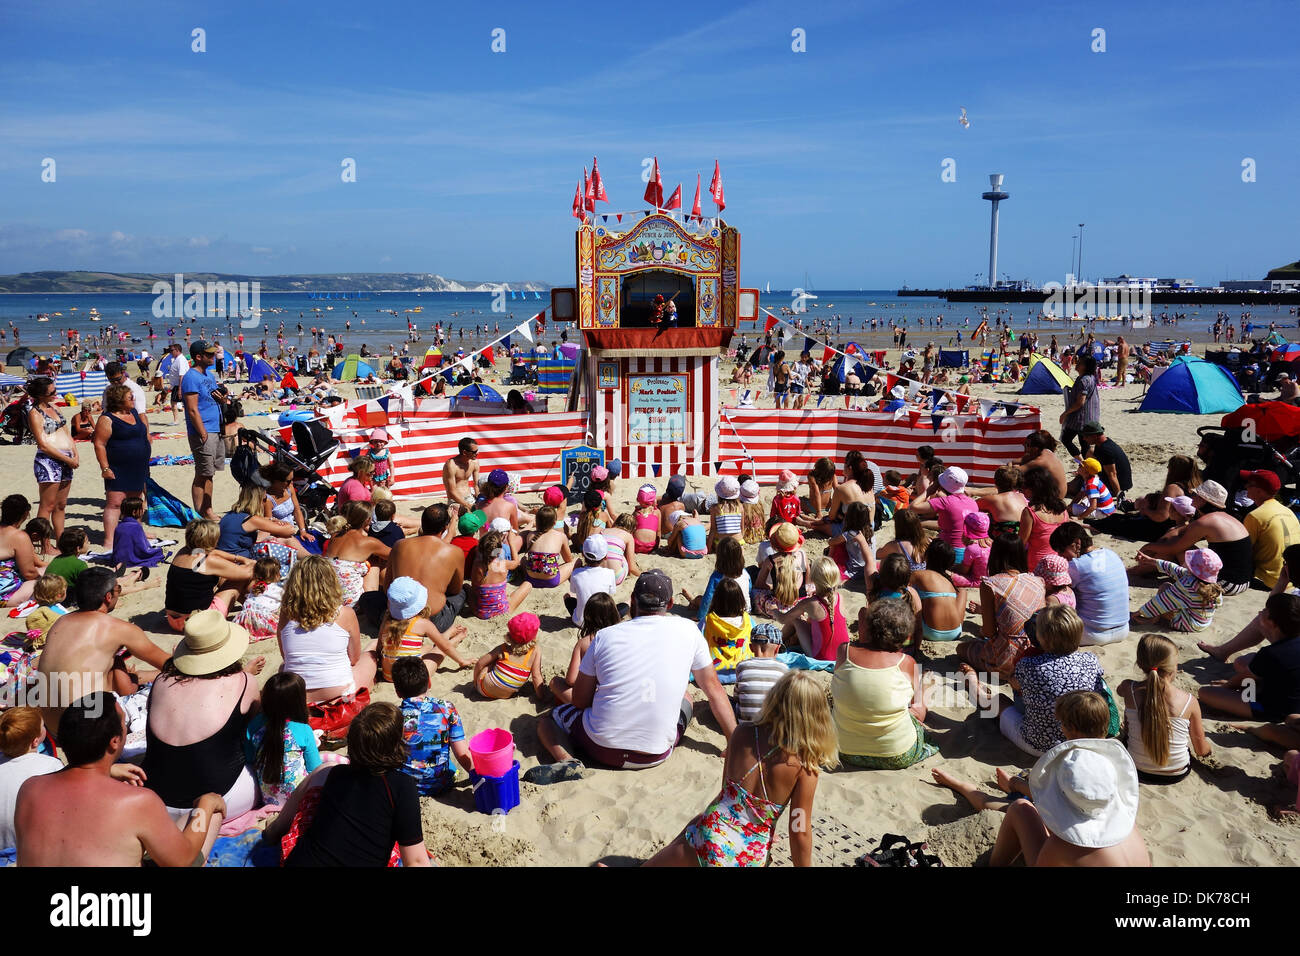 Punch and Judy show on Weymouth beach in Dorset England UK, traditional Punch and Judy show, UK Stock Photo